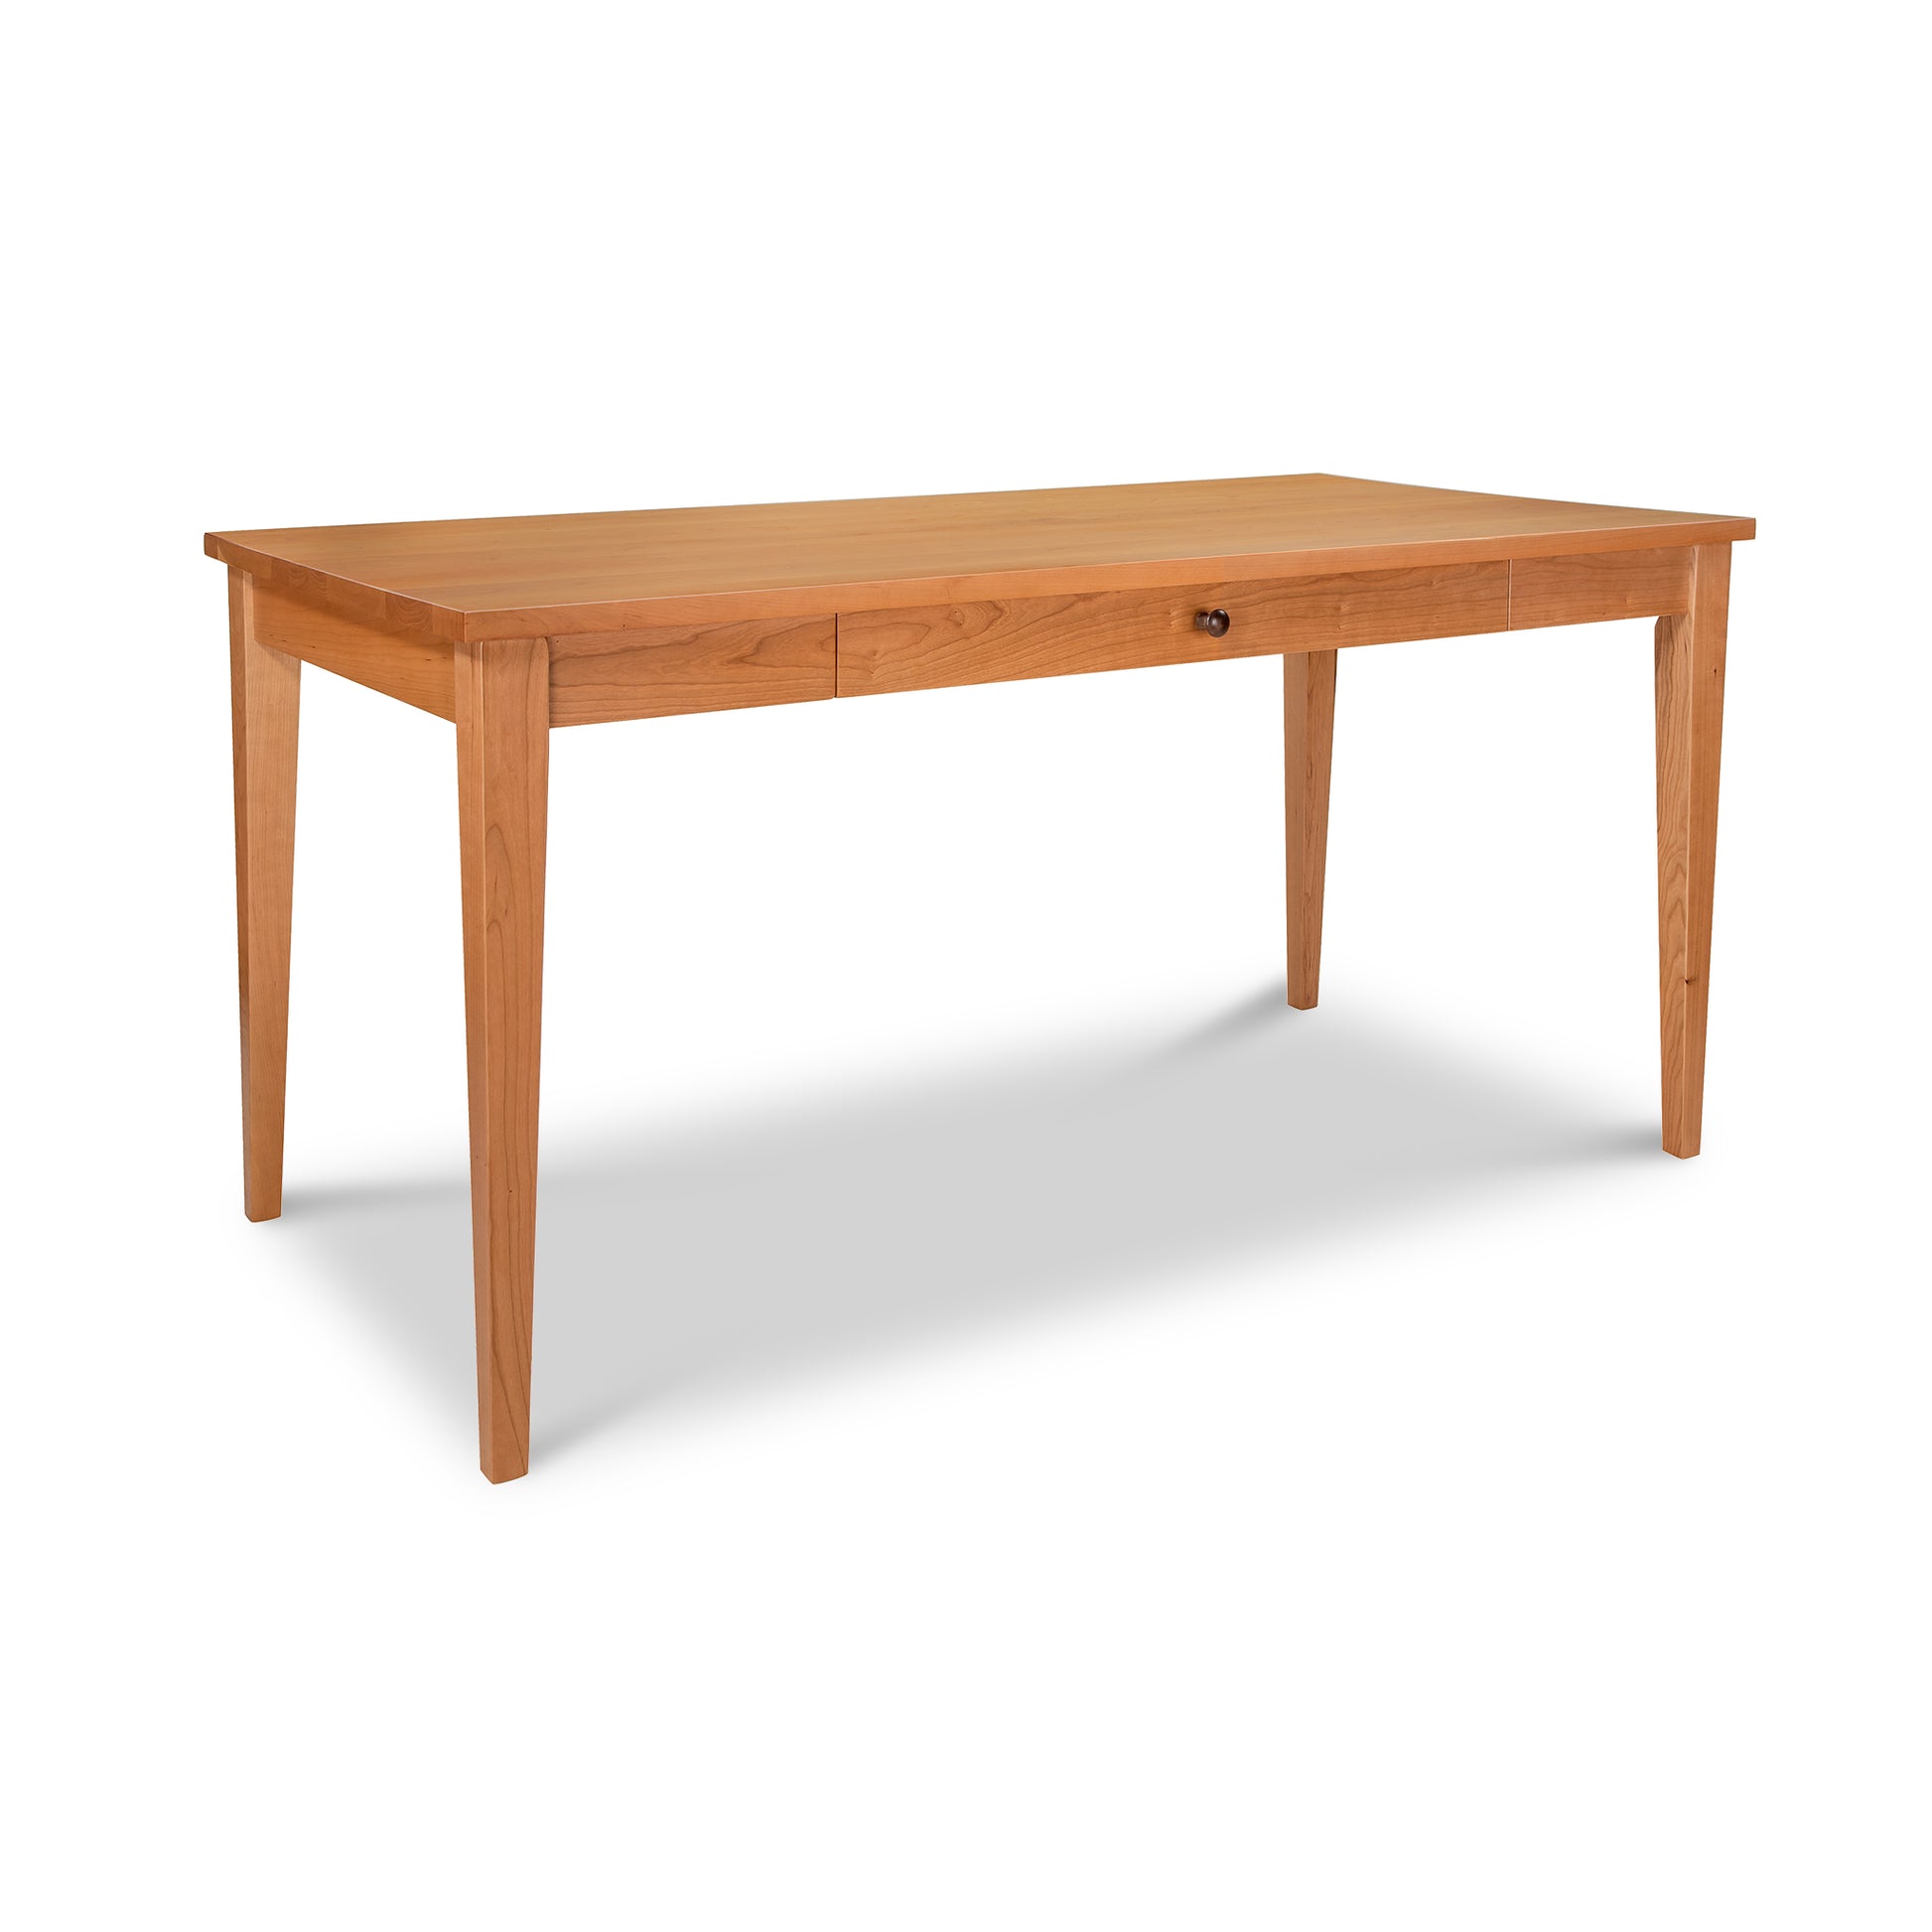 An eco-friendly Classic Shaker Writing Desk with a natural solid wood top, by Lyndon Furniture.